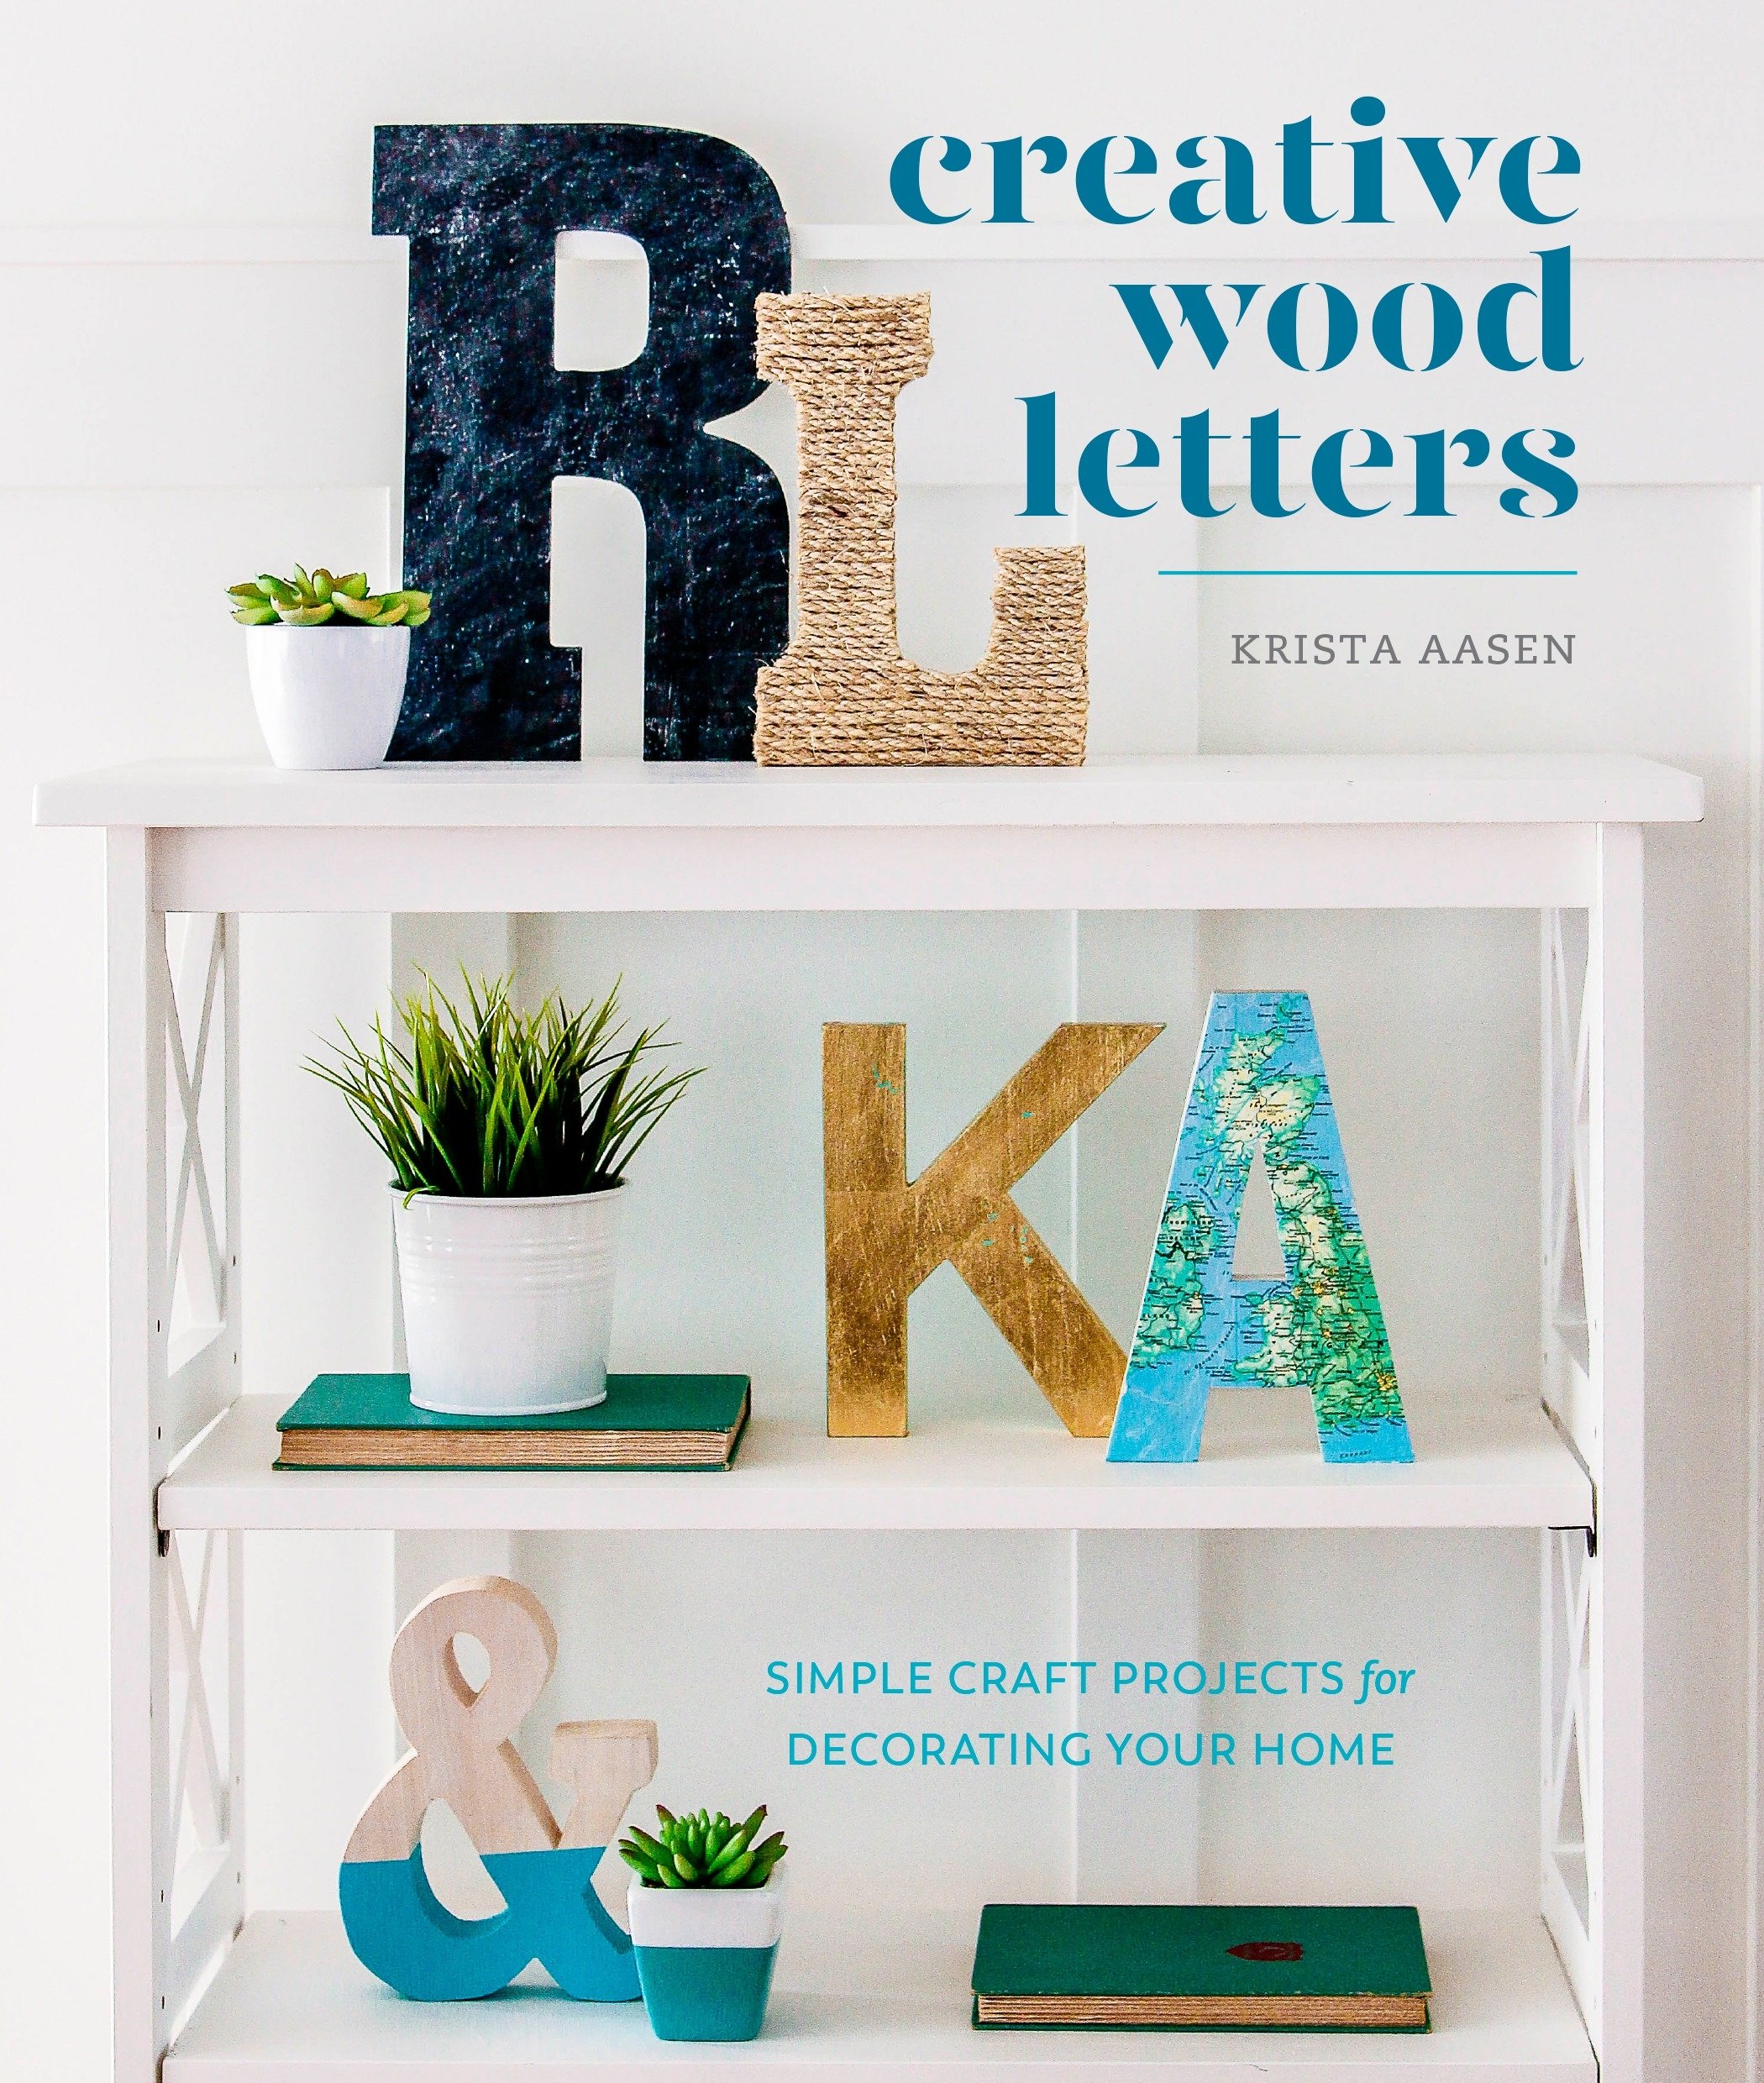 Creative wood letters graphic.